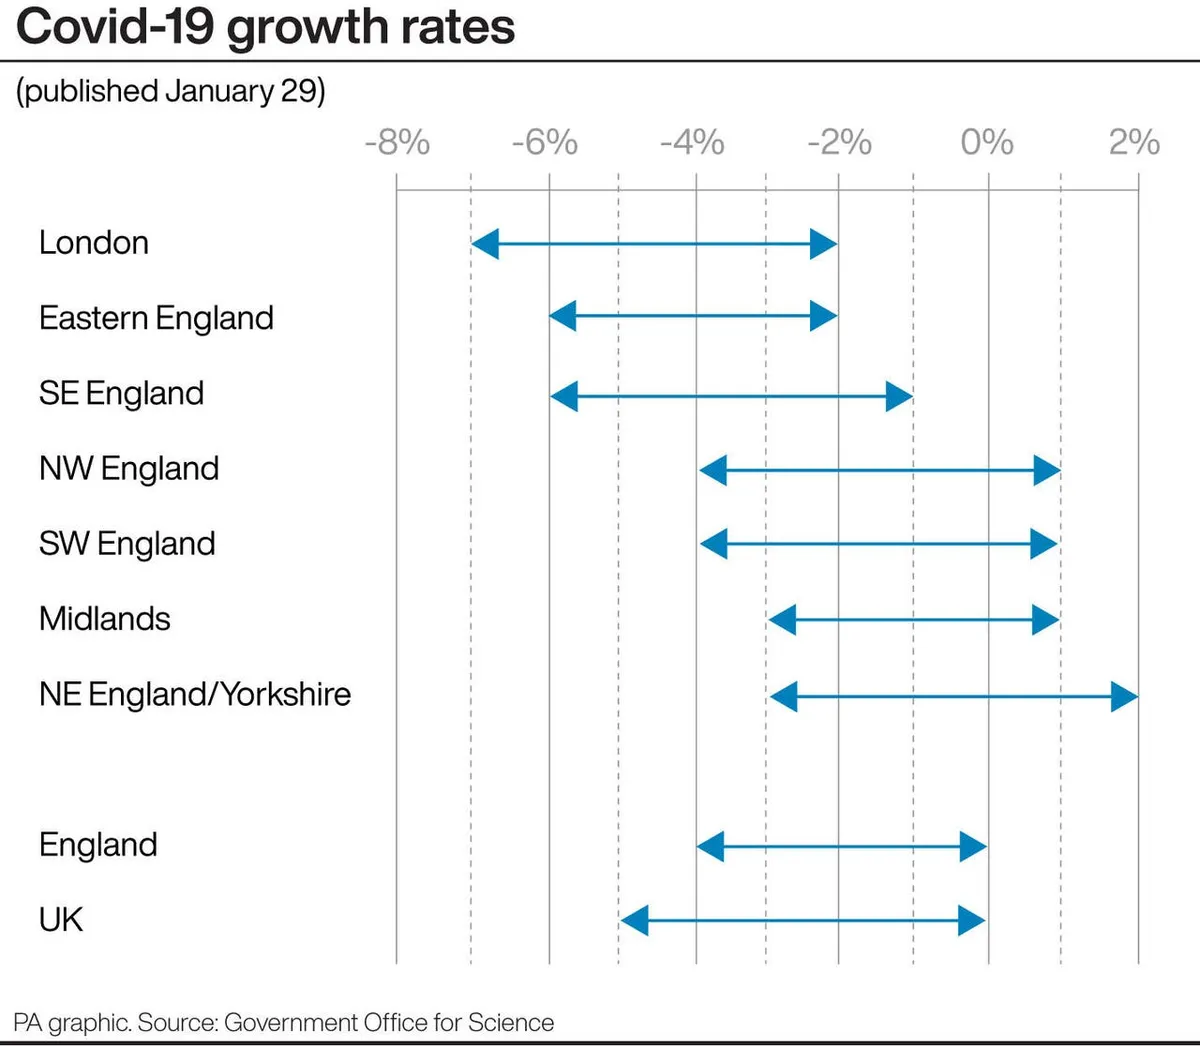 COVID-19 growth rates across the UK compared to England © PA Media